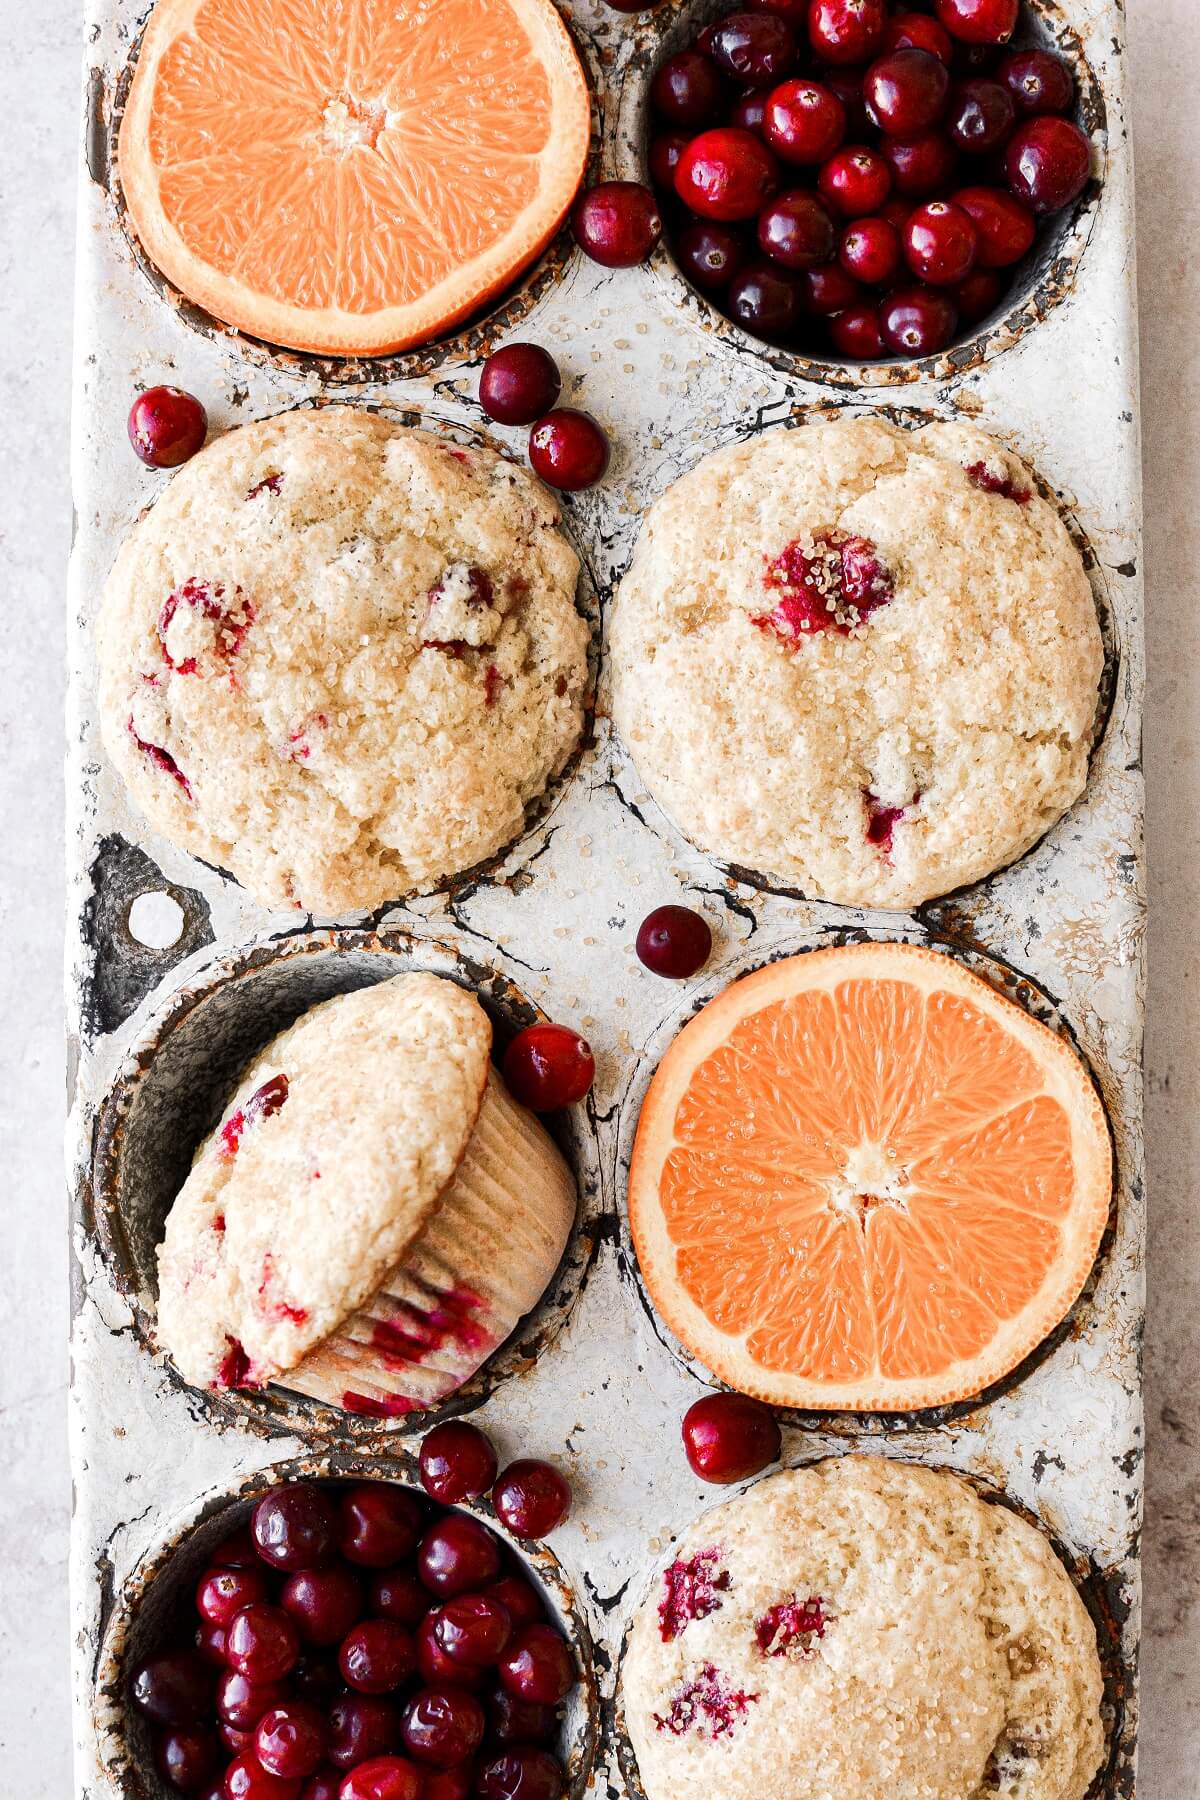 Oranges, cranberries and cranberry orange muffins, arranged in a vintage muffin tin.